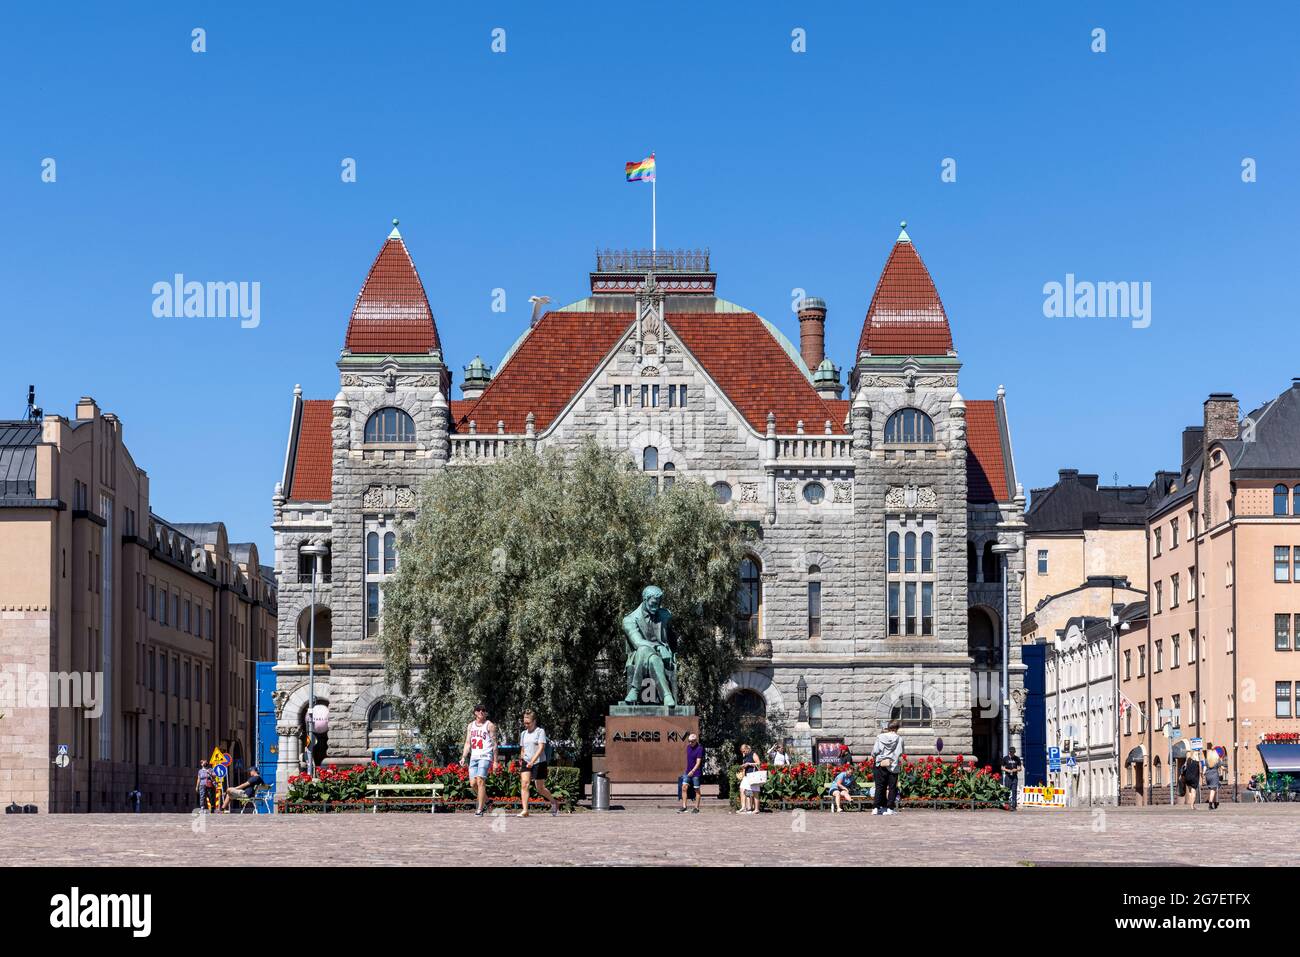 National Theatre building in heart of Helsinki with incidental people Stock Photo